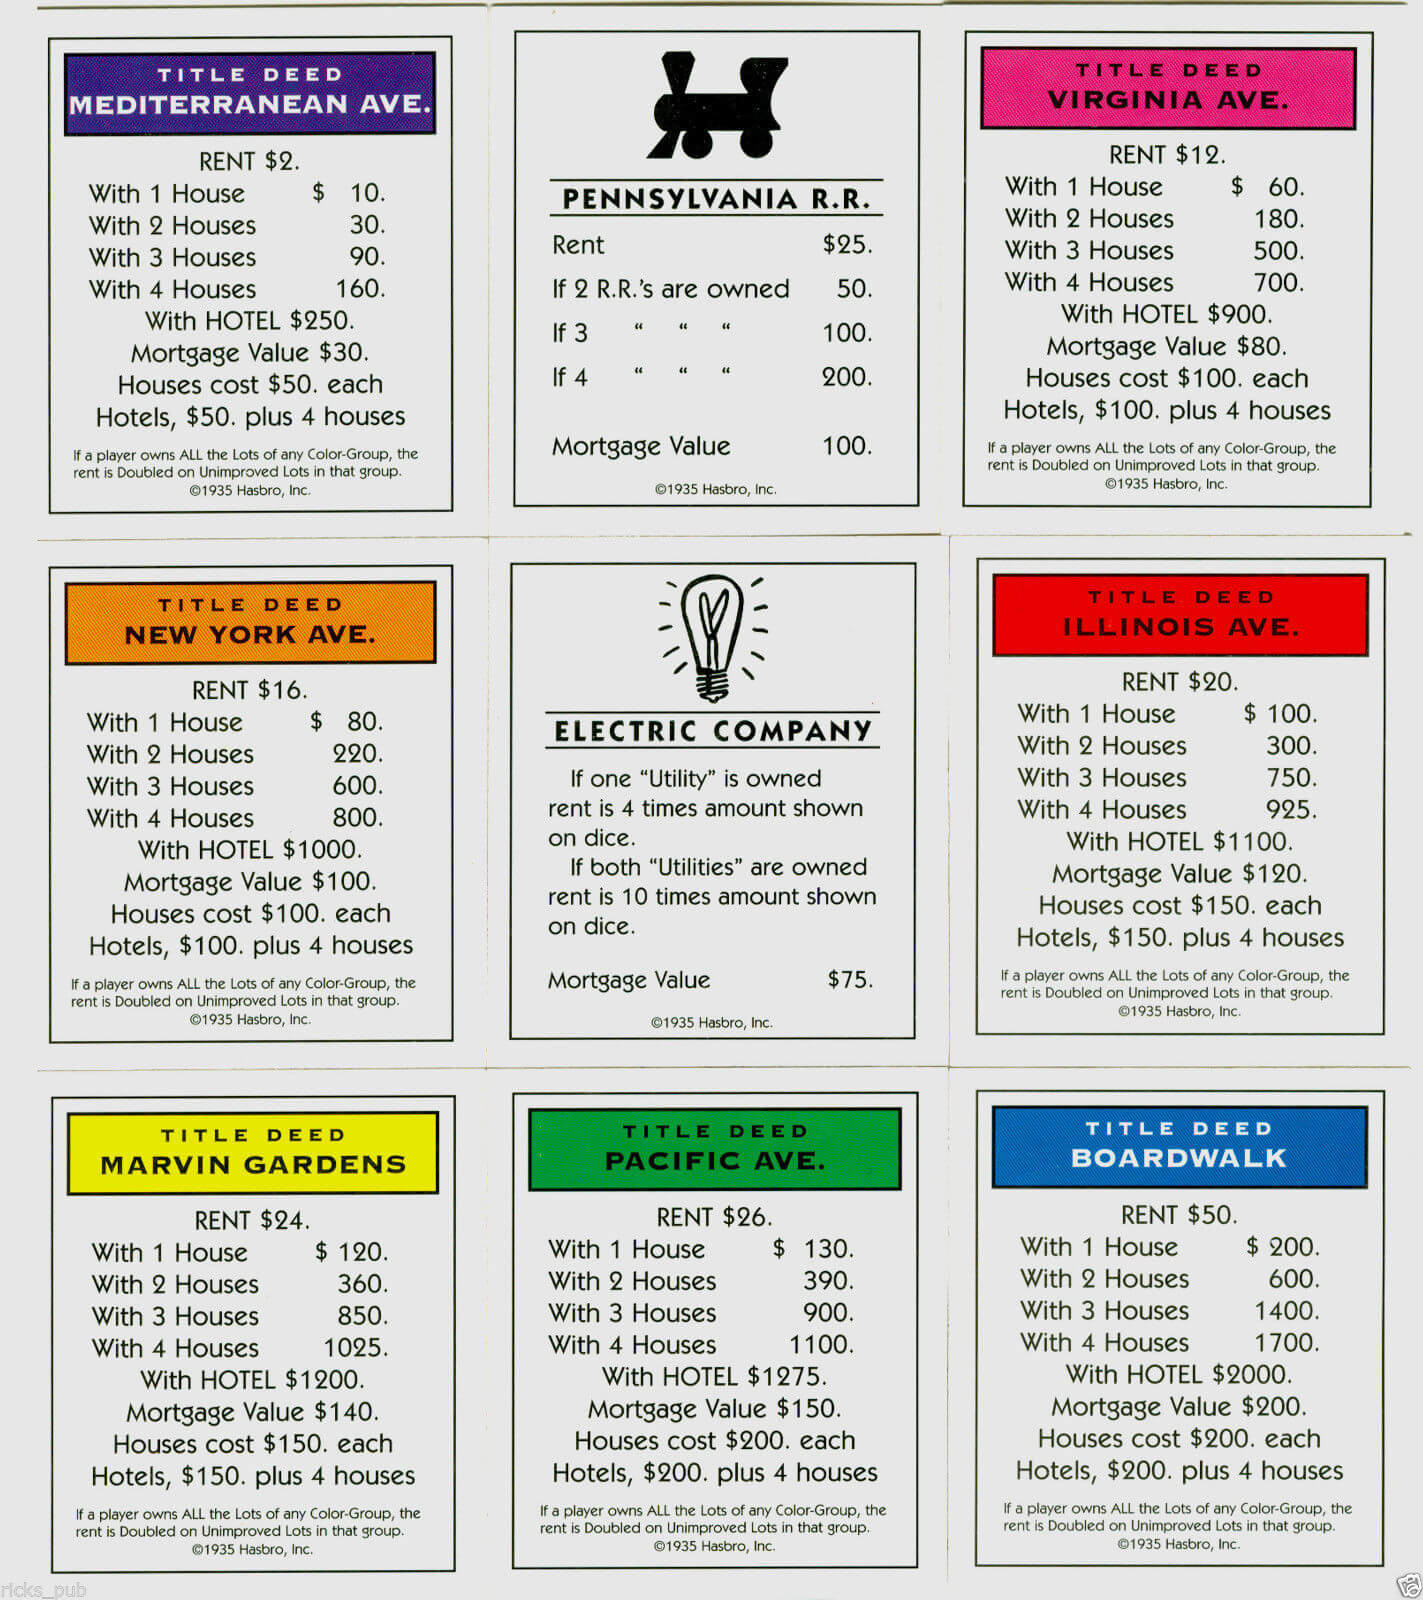 1C1 Monopoly Chance Card Template | Wiring Library Pertaining To Monopoly Chance Cards Template